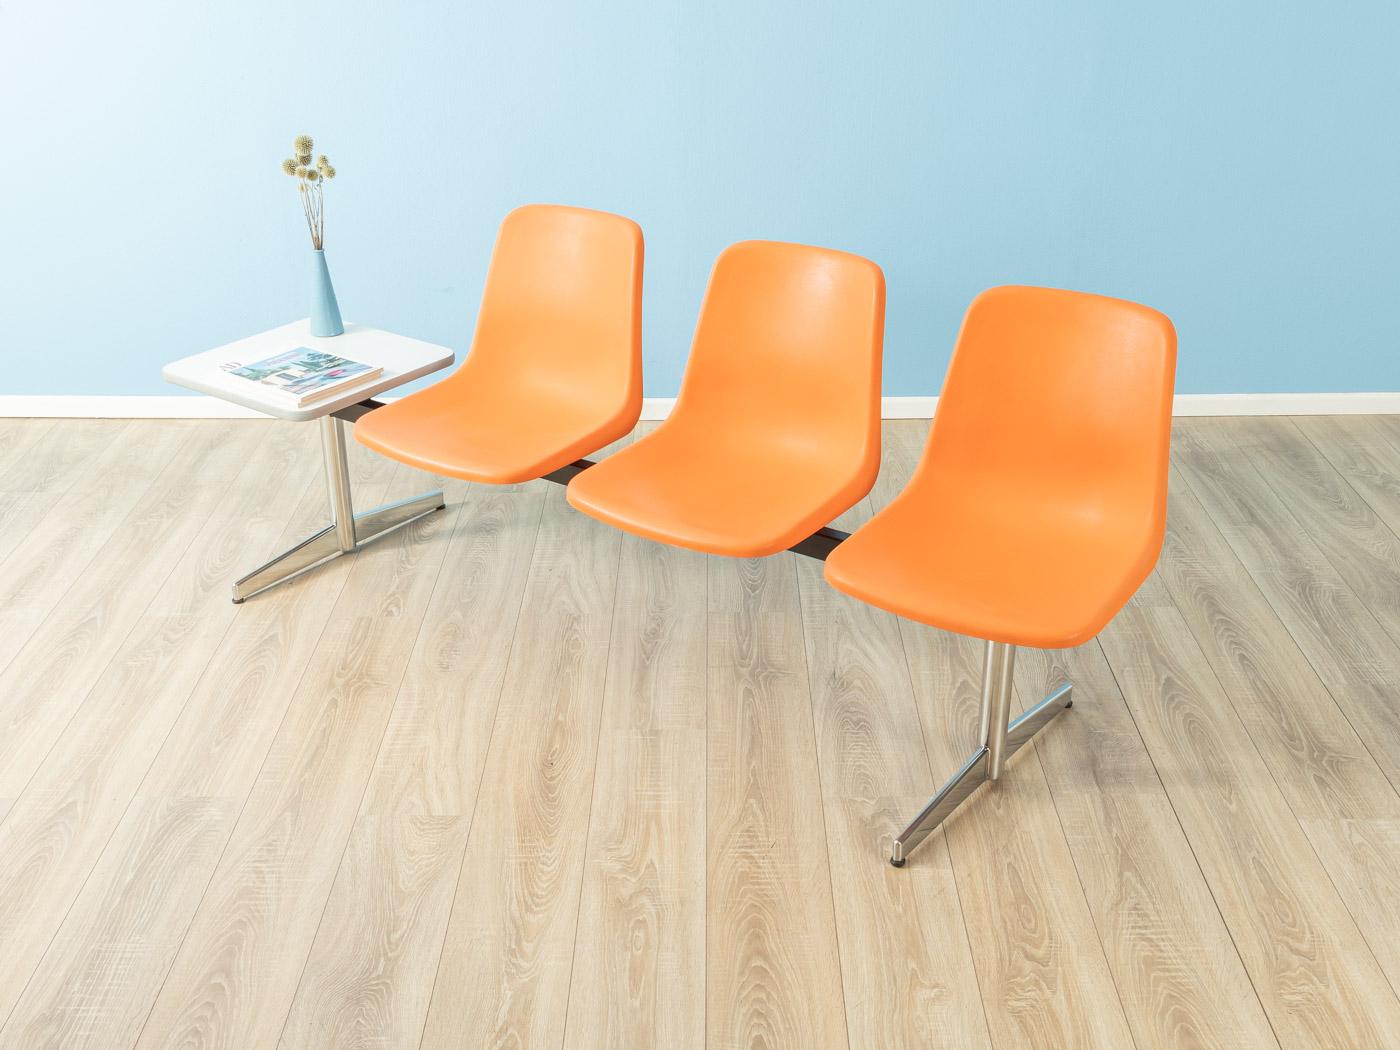 Unique waiting bench from the 1970s, high-quality frame made of steel and stainless steel with three seat shells made of plastic in orange. The table has been coated with white Formica and a fourth seat shell can be mounted instead of the table.